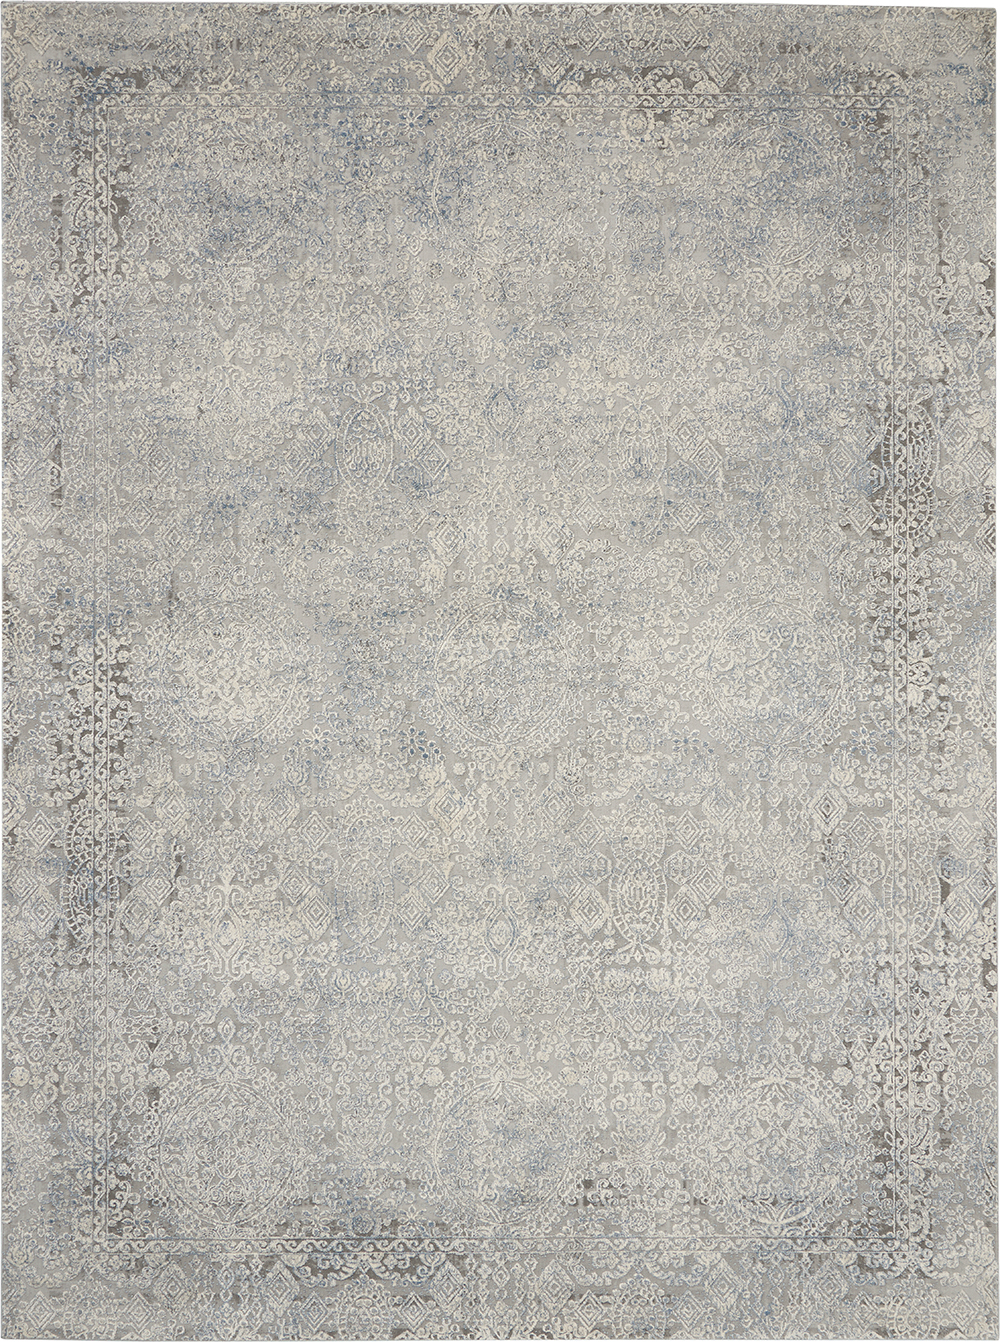 Nourison Rugs - Rustic Textures Rectanglular RUS09 Rug in Ivory / Light Blue - 3.9m x 2.8m